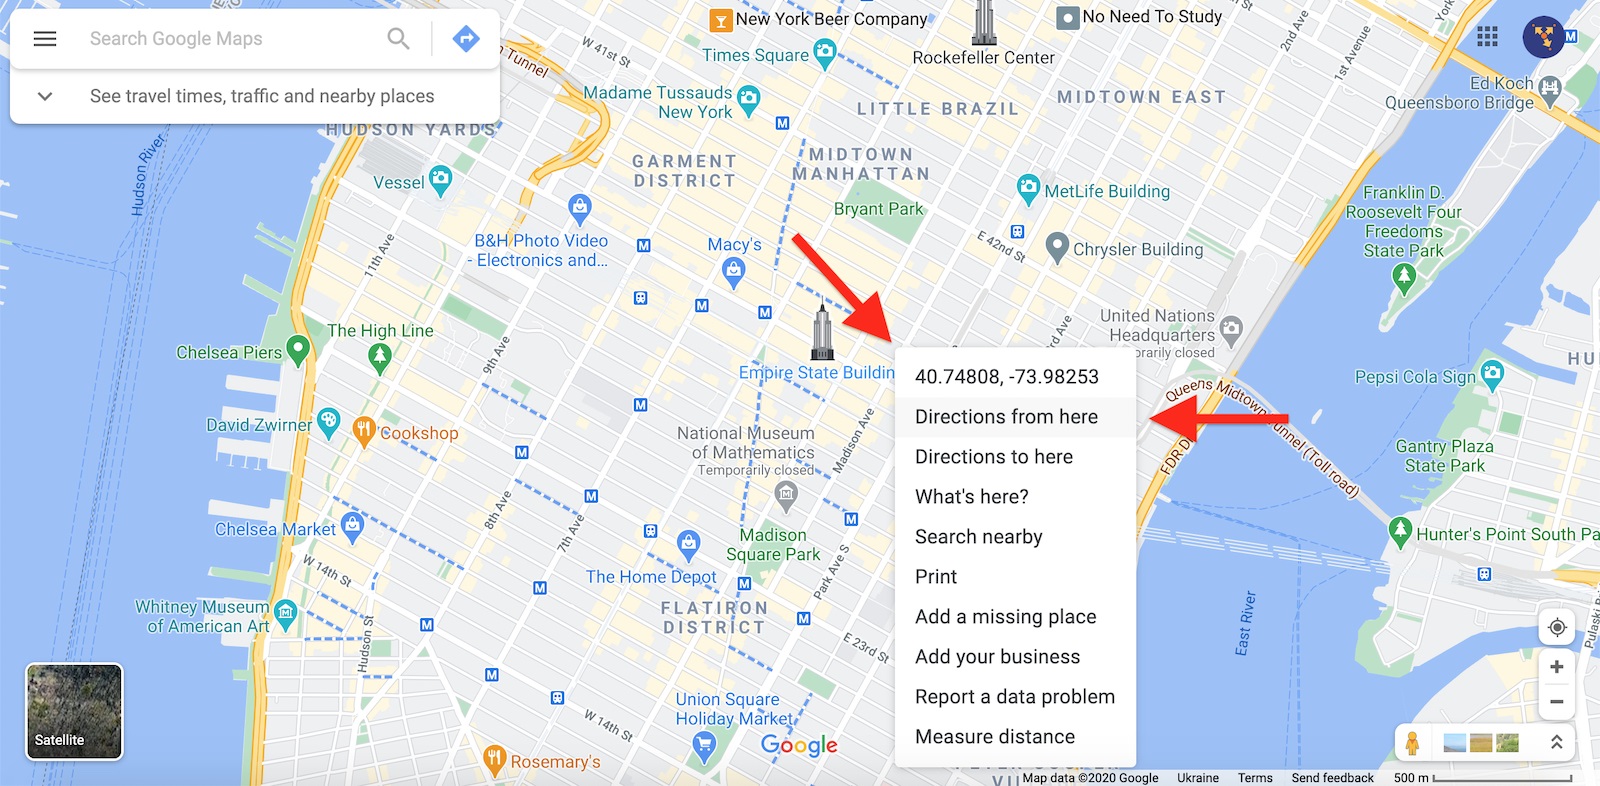 Dropping a pin on the map to add an address on the Google Maps route planner